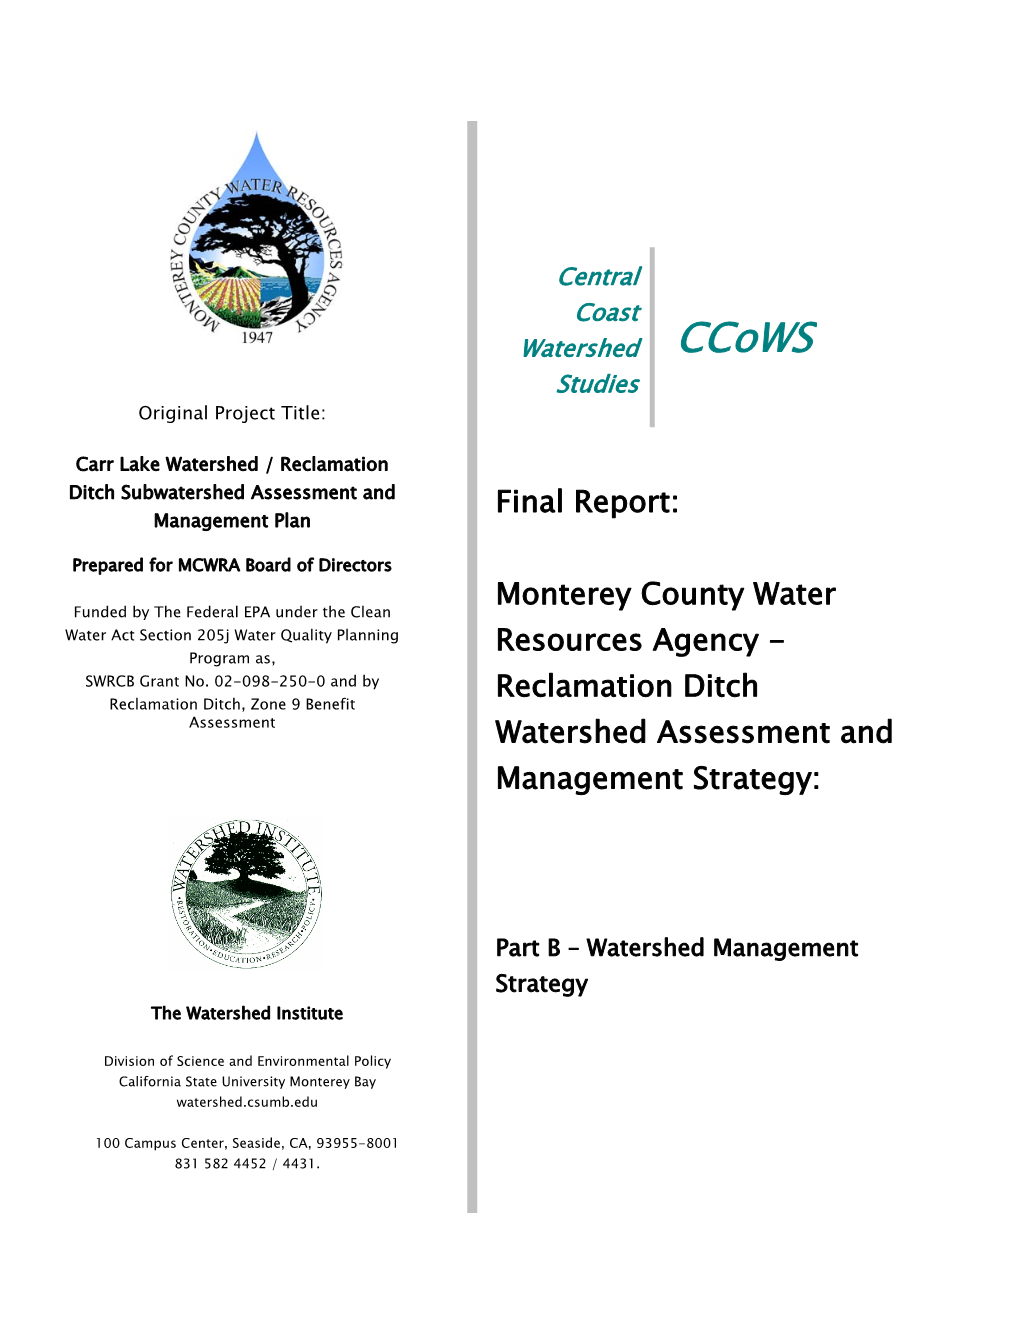 Monterey County Water Resources Agency (MCWRA)